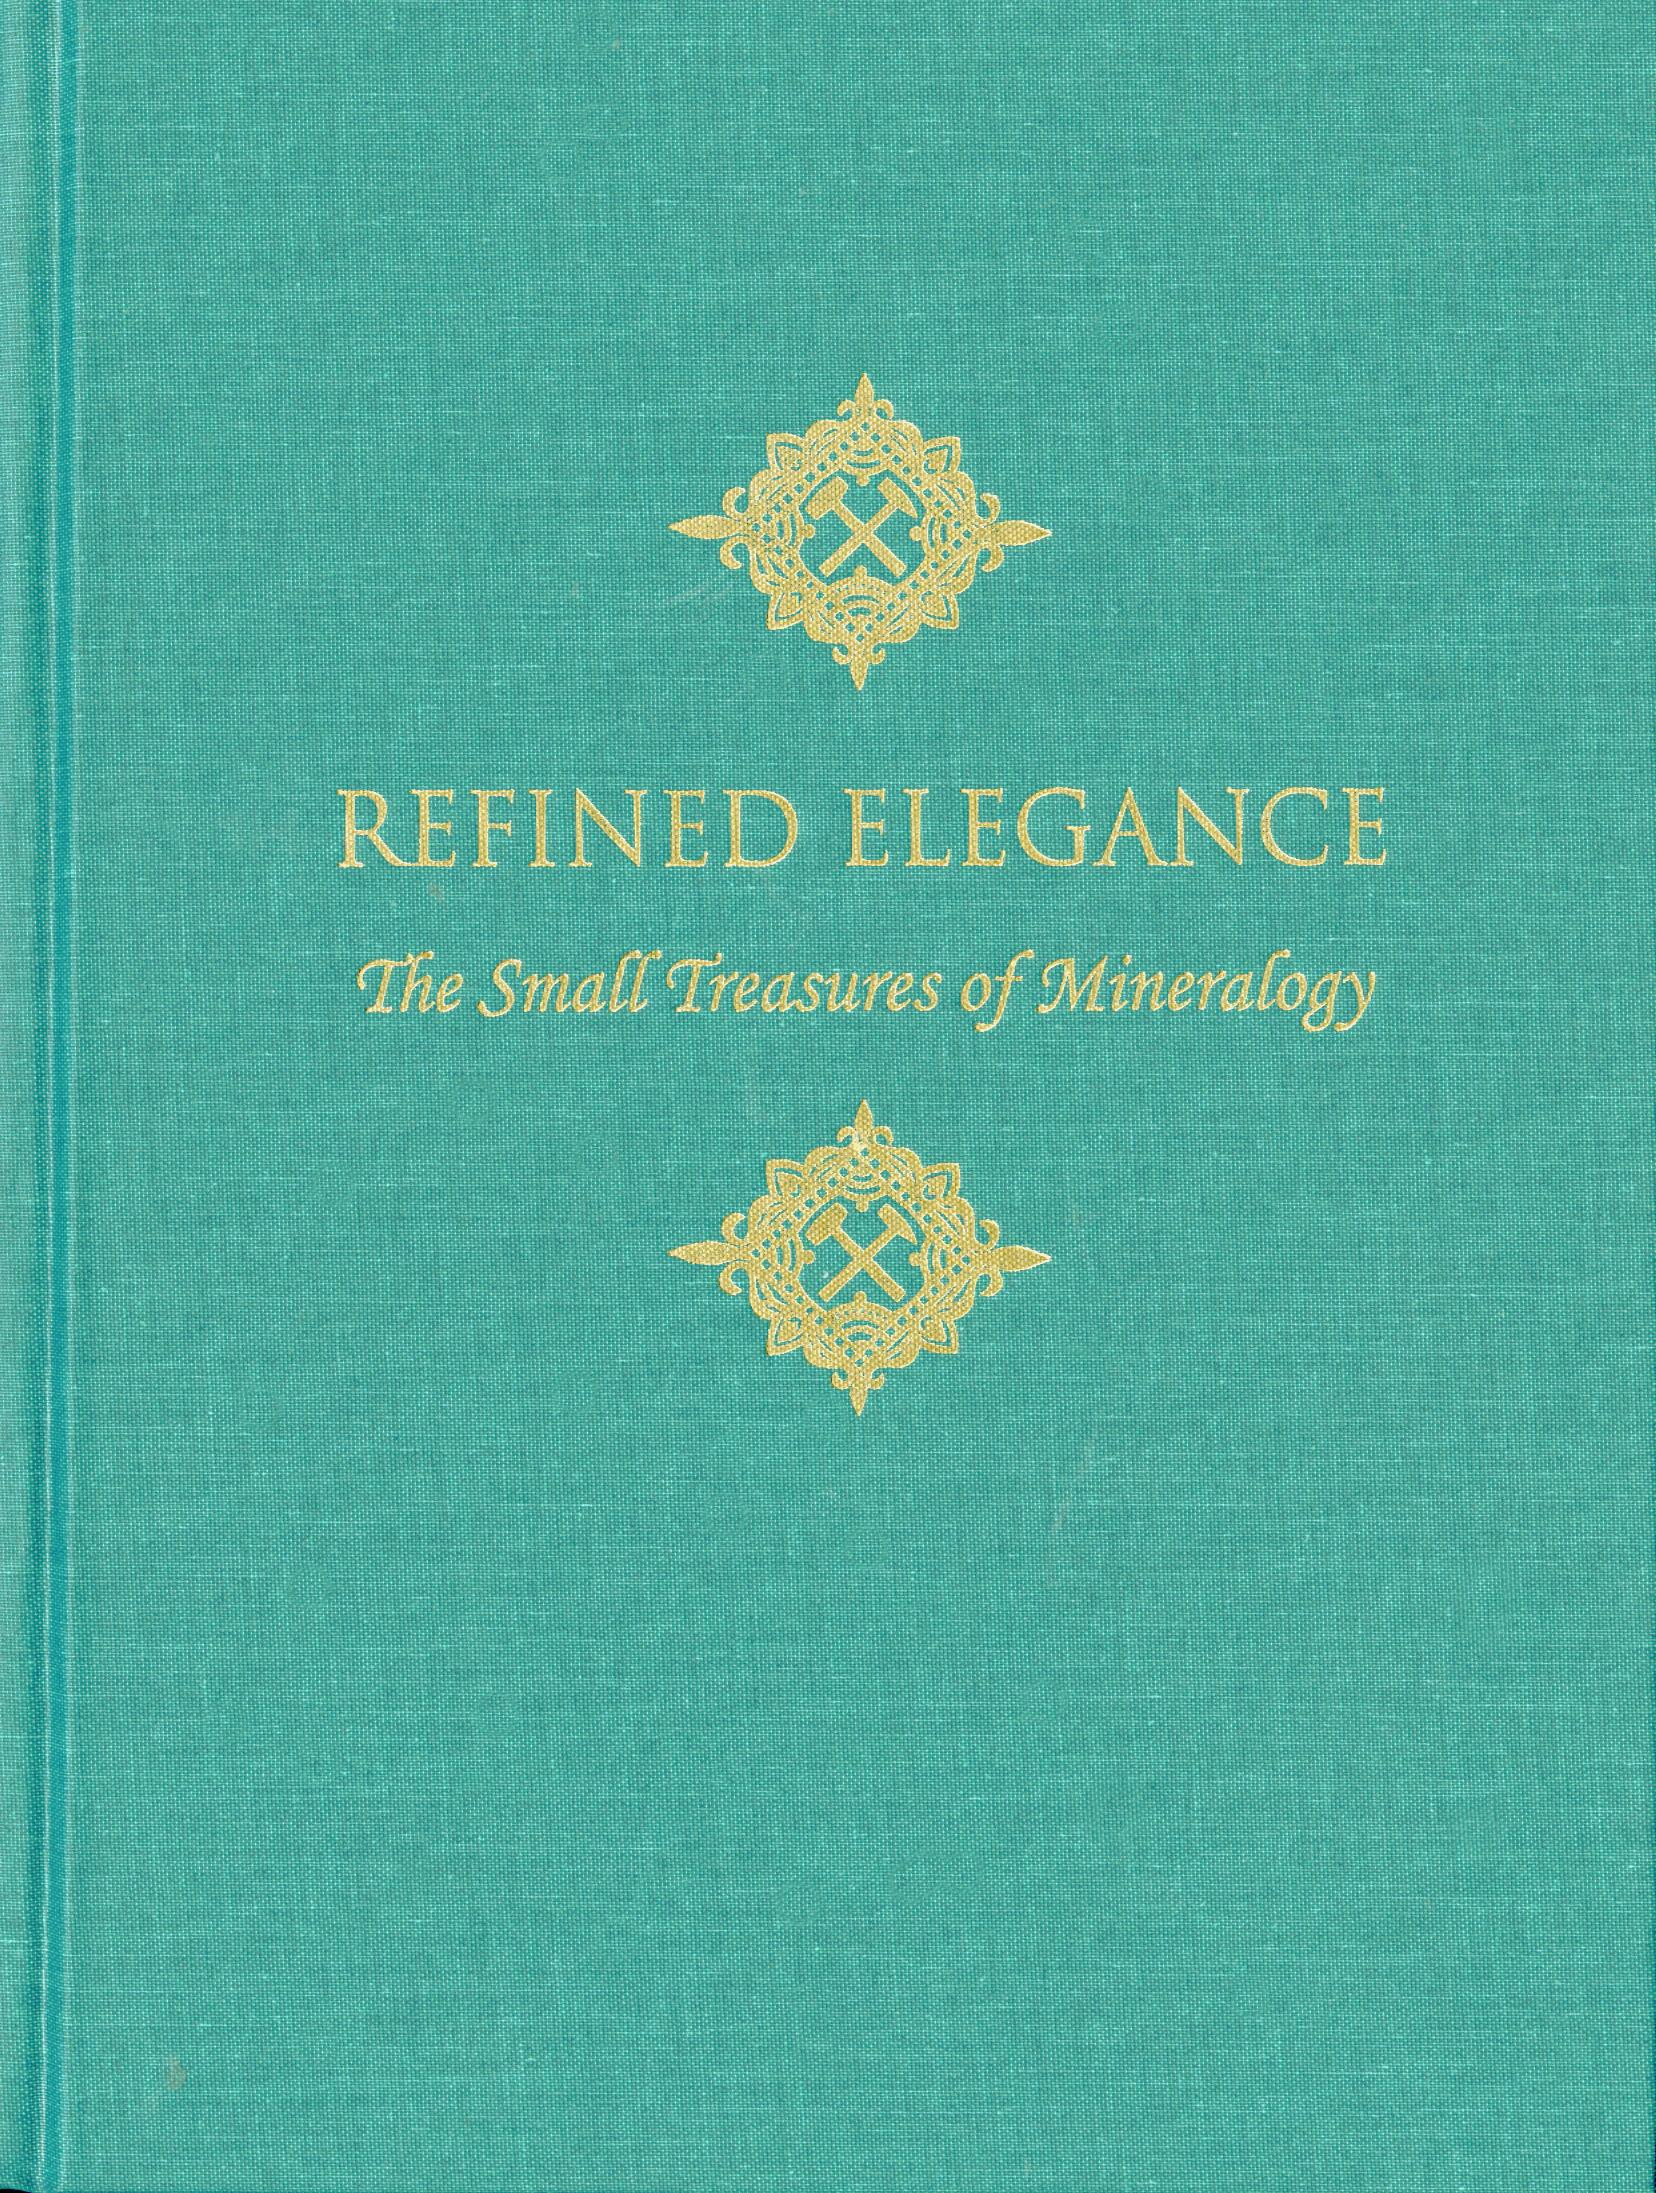 Refined Elegance: The Small Treasures of Mineralogy (Hardcover- Limited Edition)